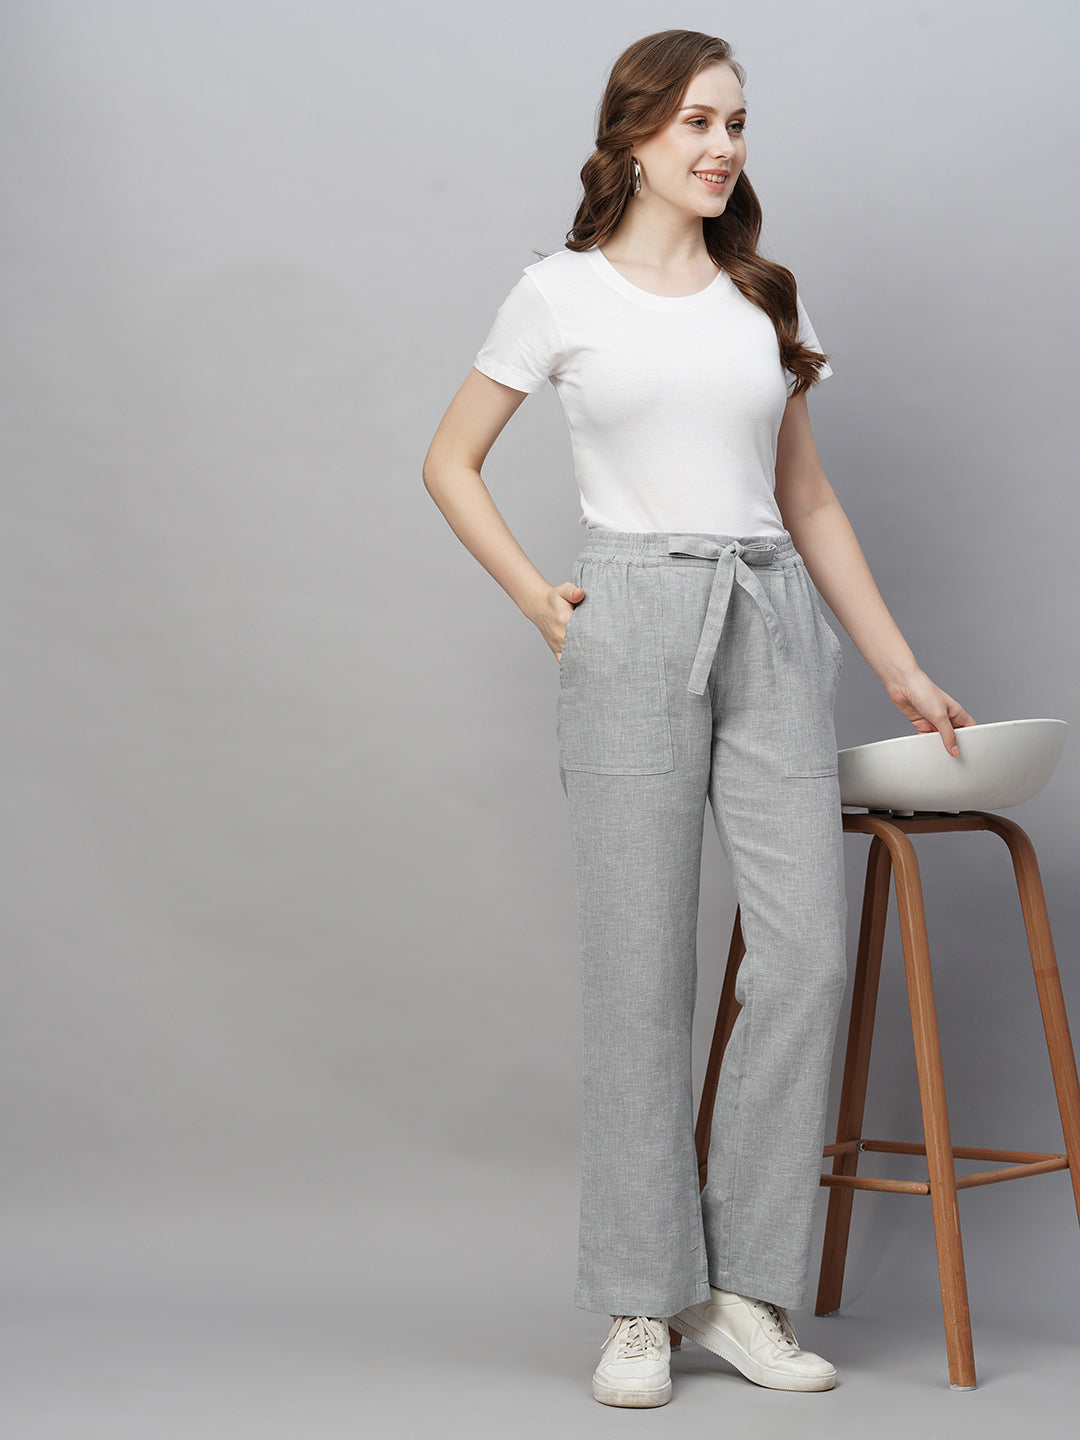 Shoppers Say the Iximo Linen Pants Are Perfect for Summer